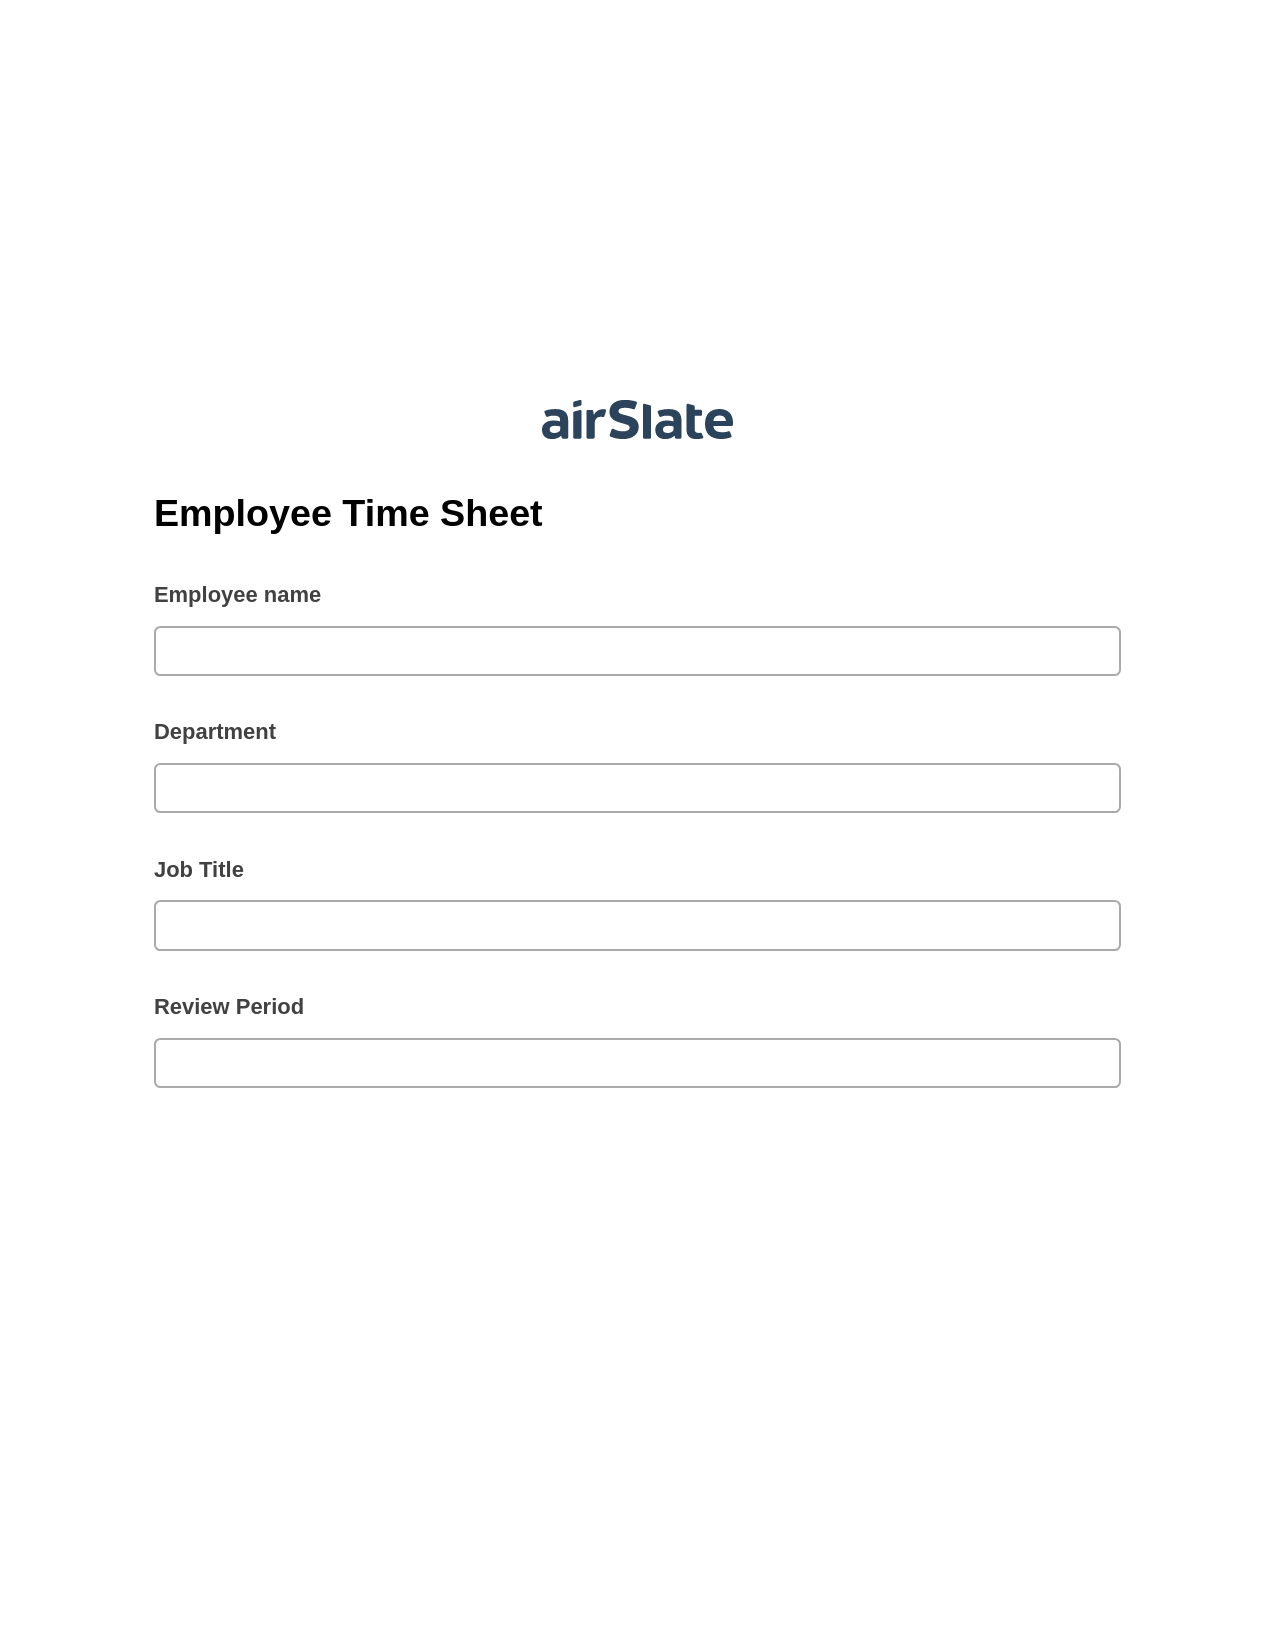 Multirole Employee Time Sheet Pre-fill Dropdowns from Office 365 Excel Bot, Update Audit Trail Bot, Archive to SharePoint Folder Bot